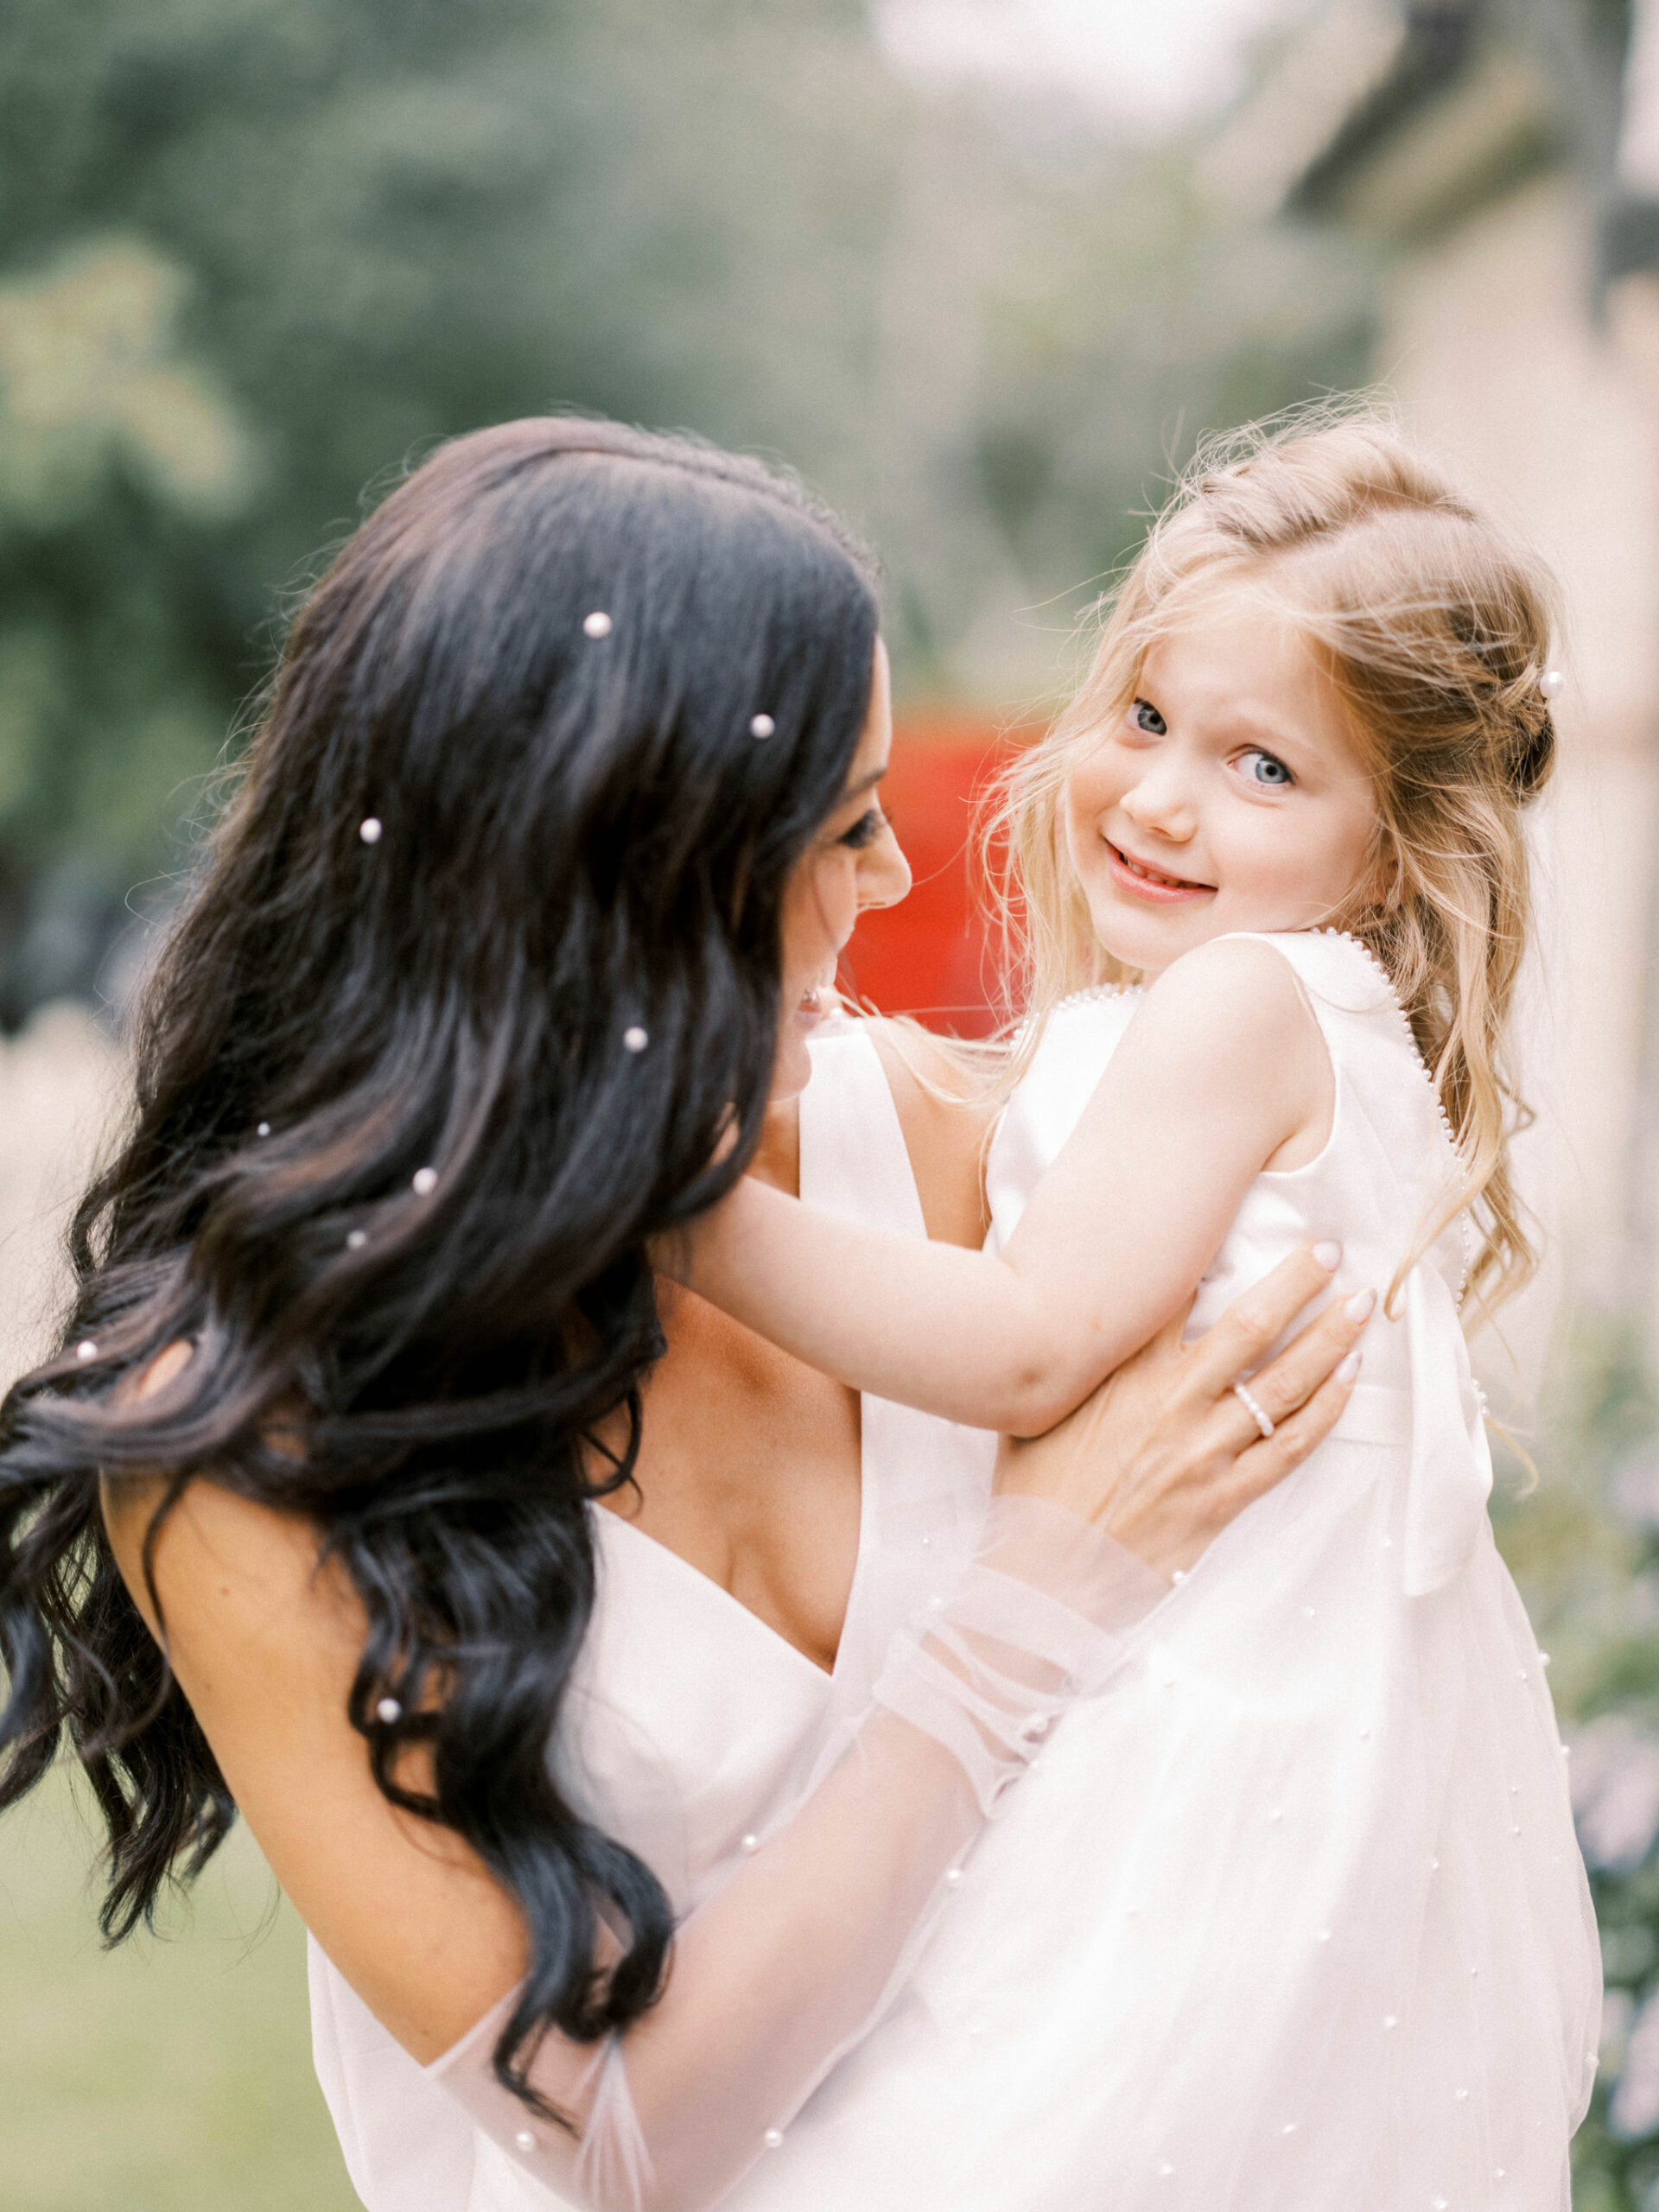 How to manage having kids at your wedding